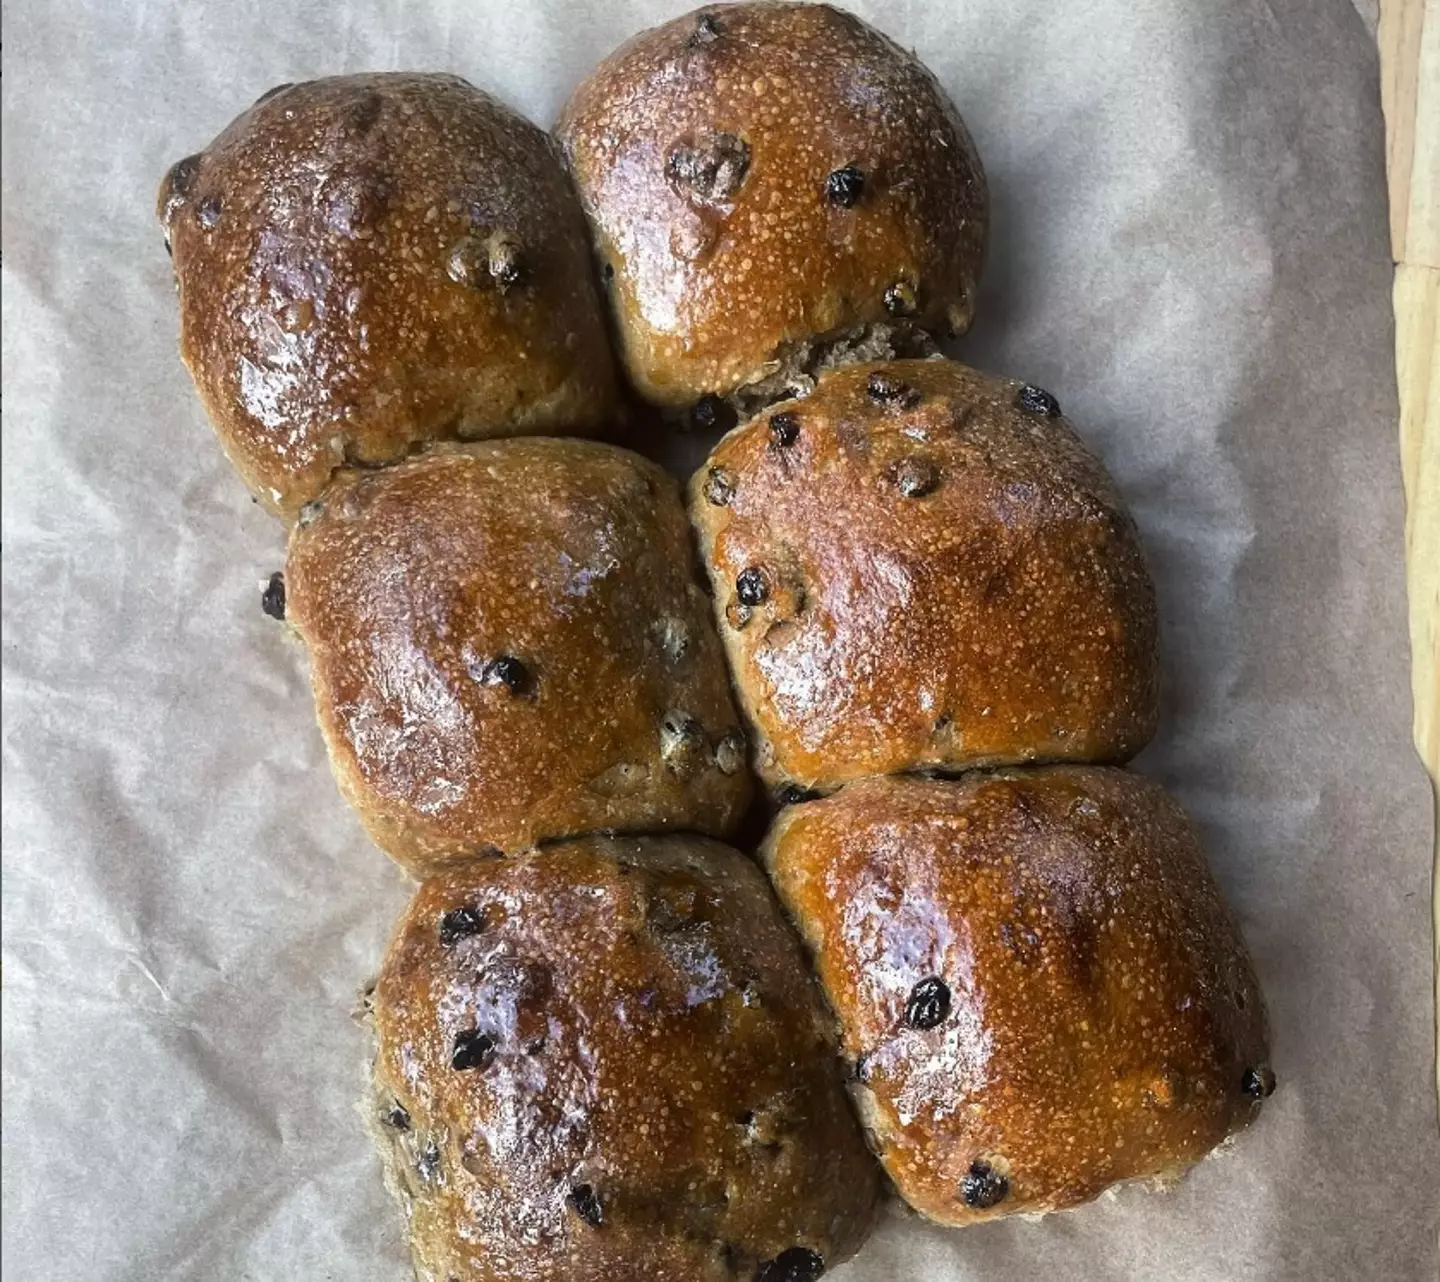 The Easter buns without the crosses usually put onto Hot Cross Buns.